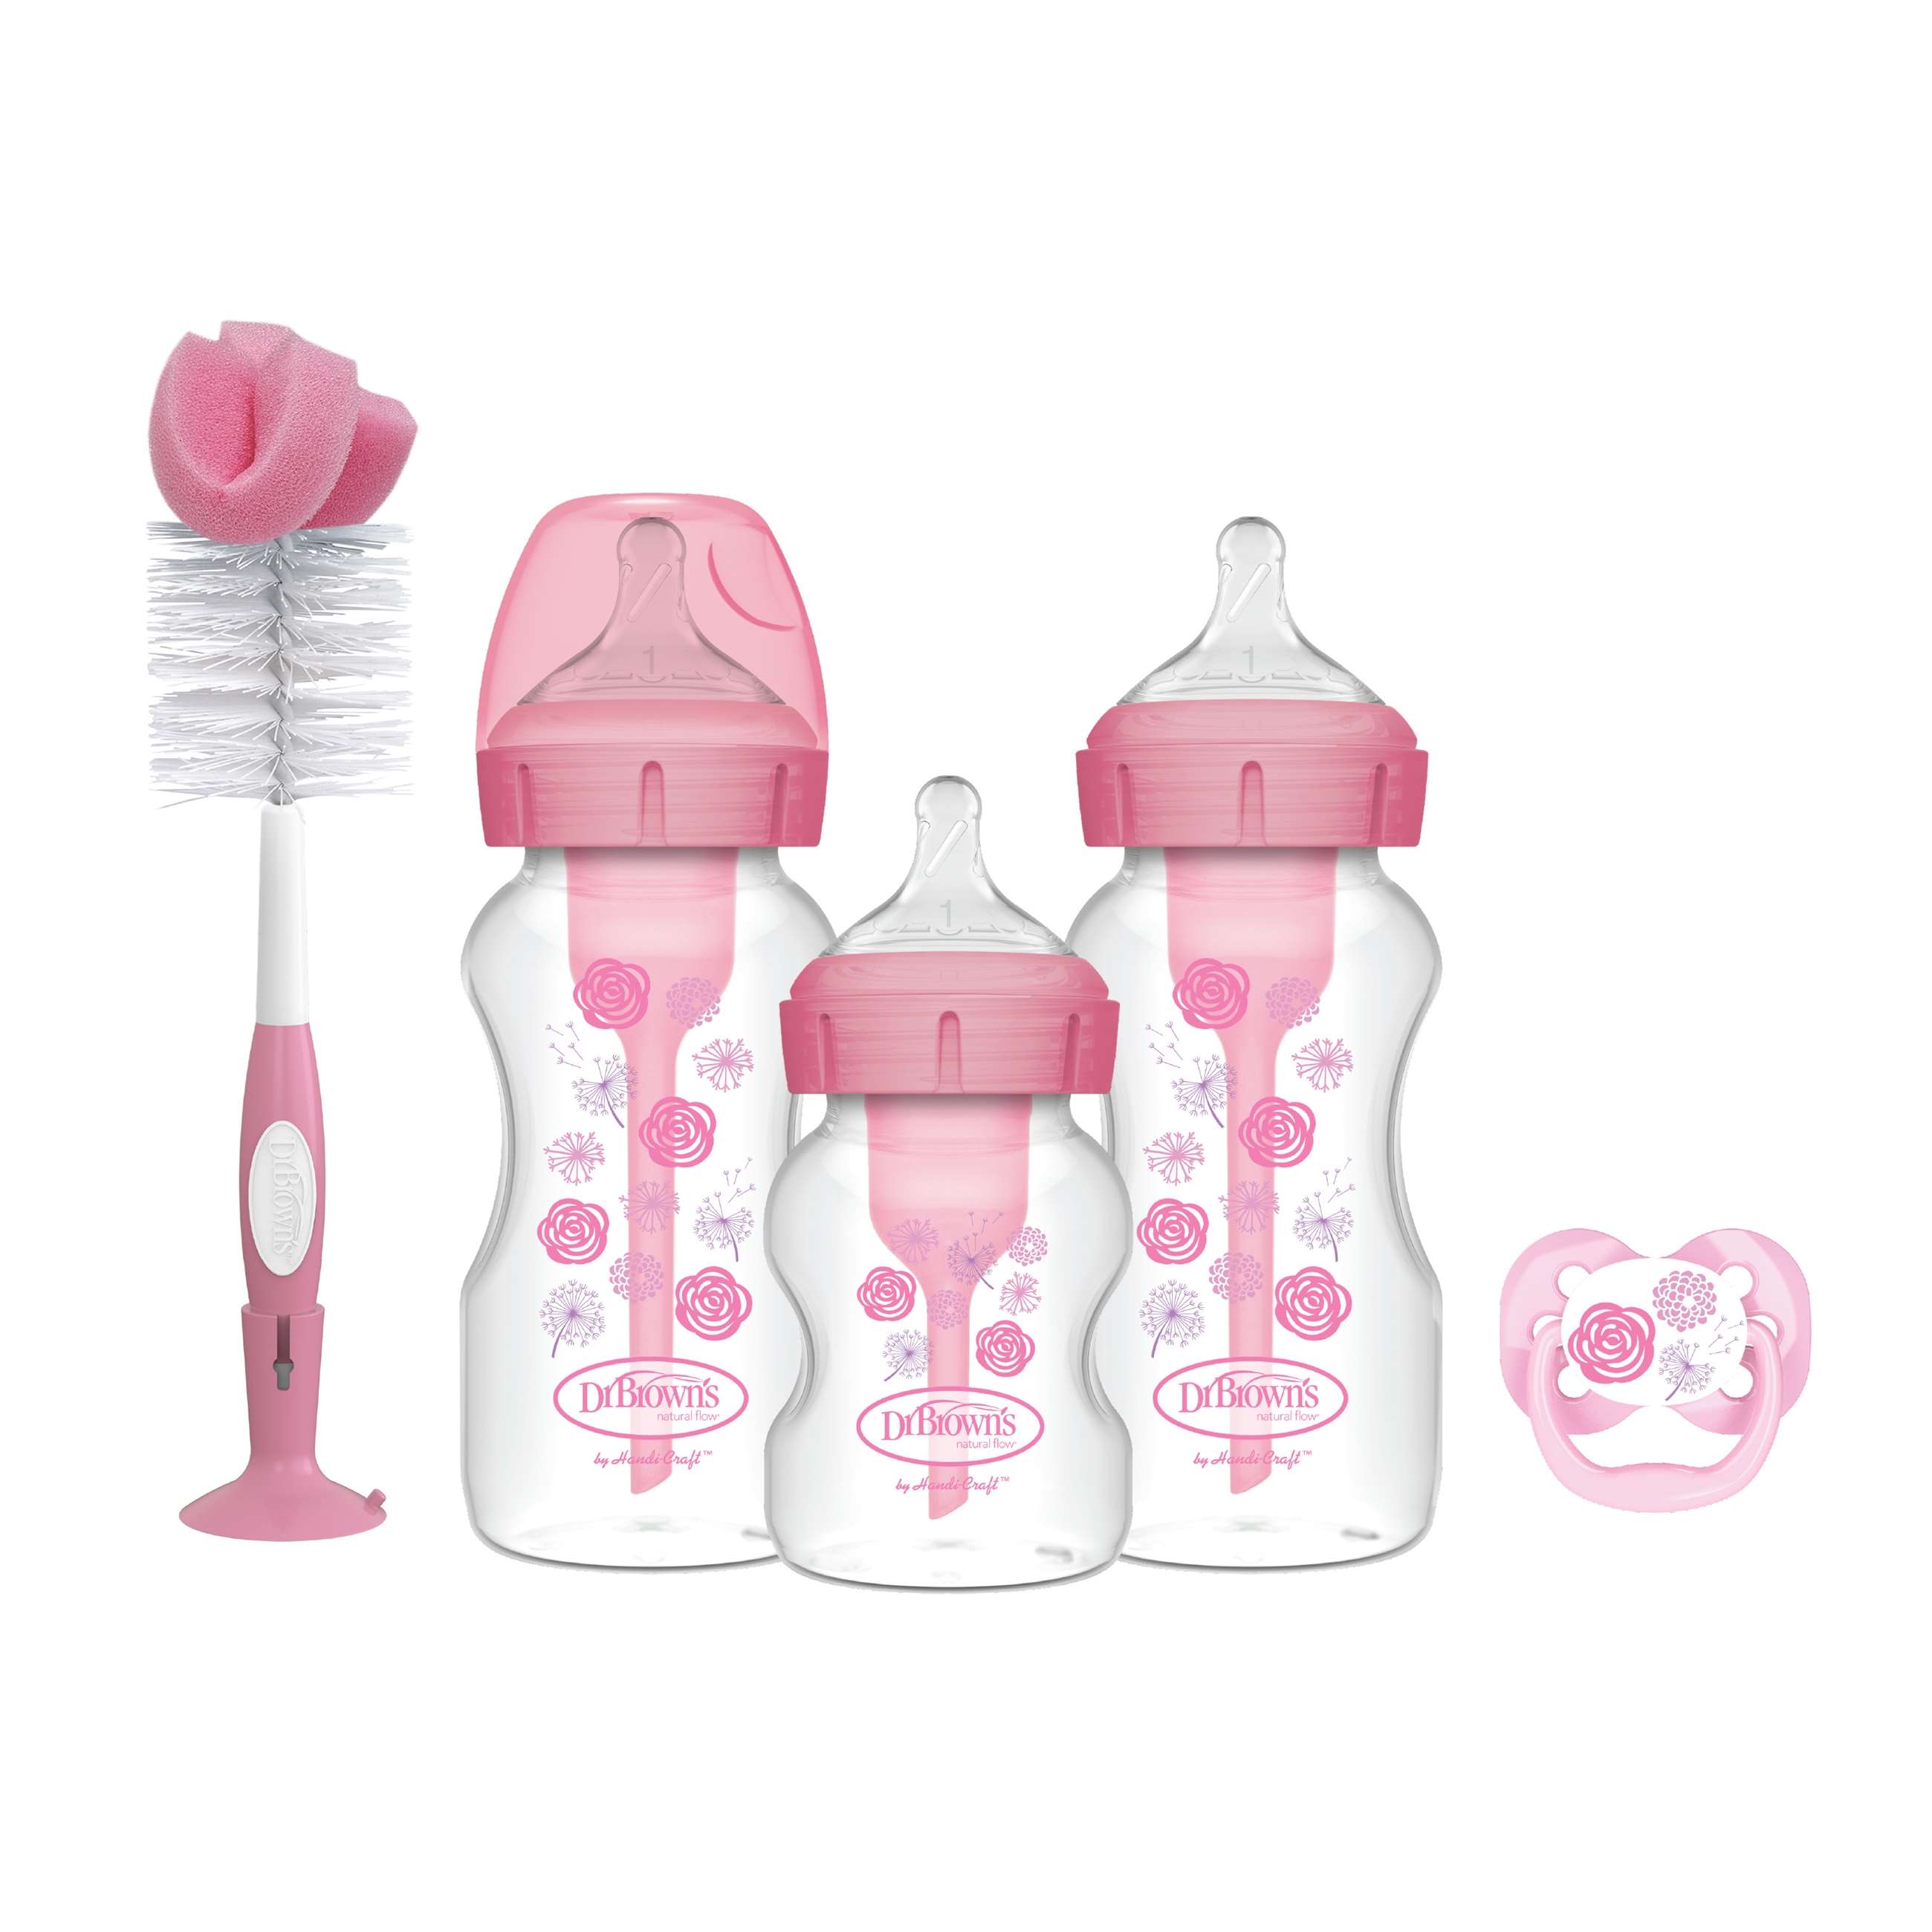 wb03610-intlx_product_optionsplus_wide-neck_pink_floral_deco_bottle_gift_set